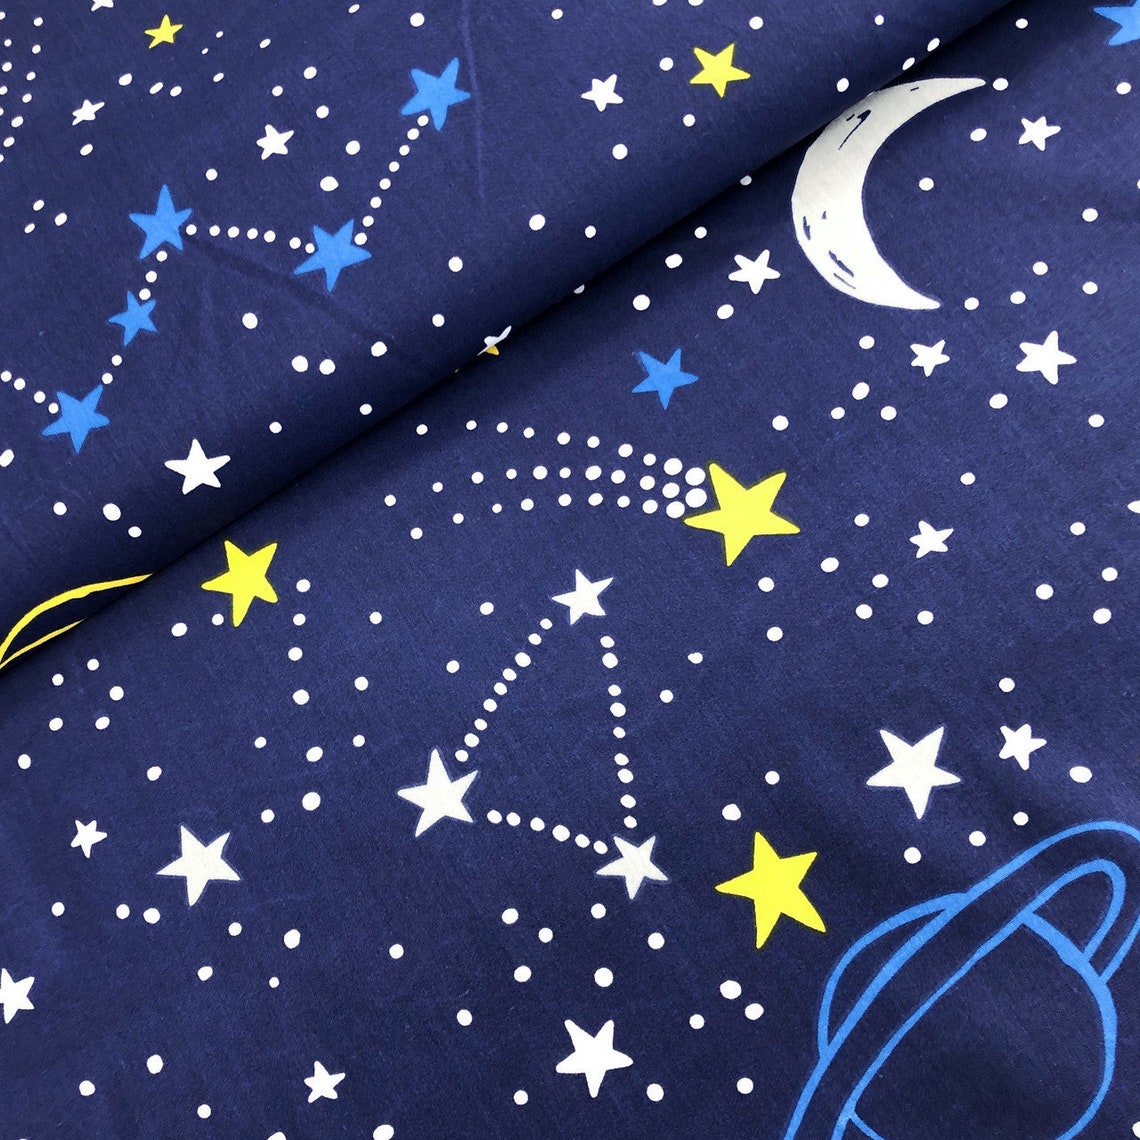 Stars Cotton Fabric Stars fabric by yard Space Fabric | Etsy